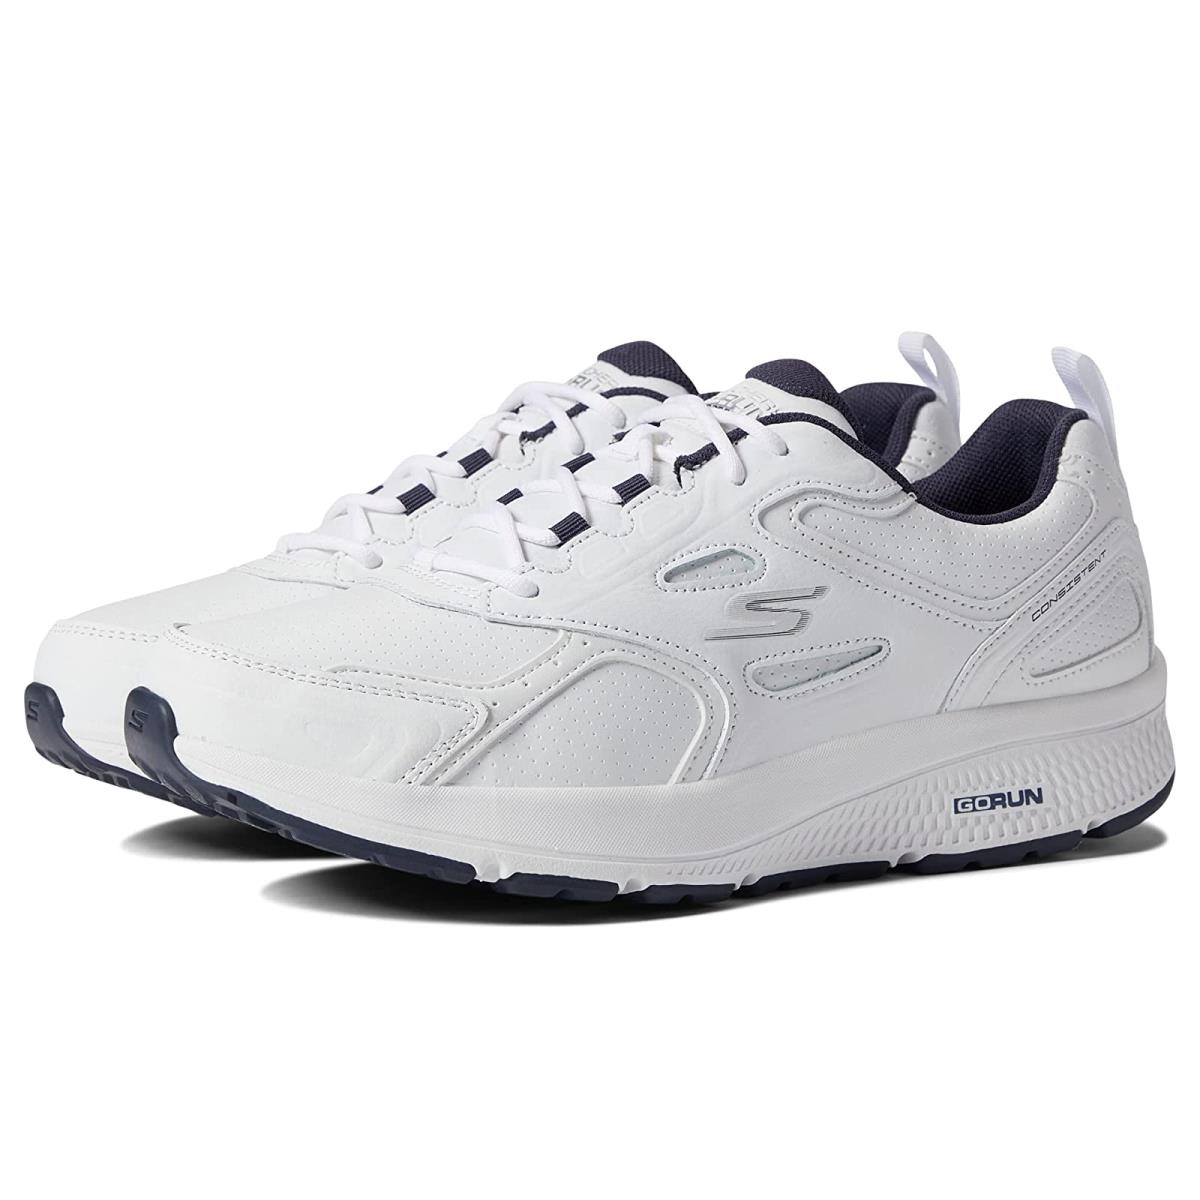 Man`s Sneakers Athletic Shoes Skechers Go Run Consistent - 220085 White/Navy